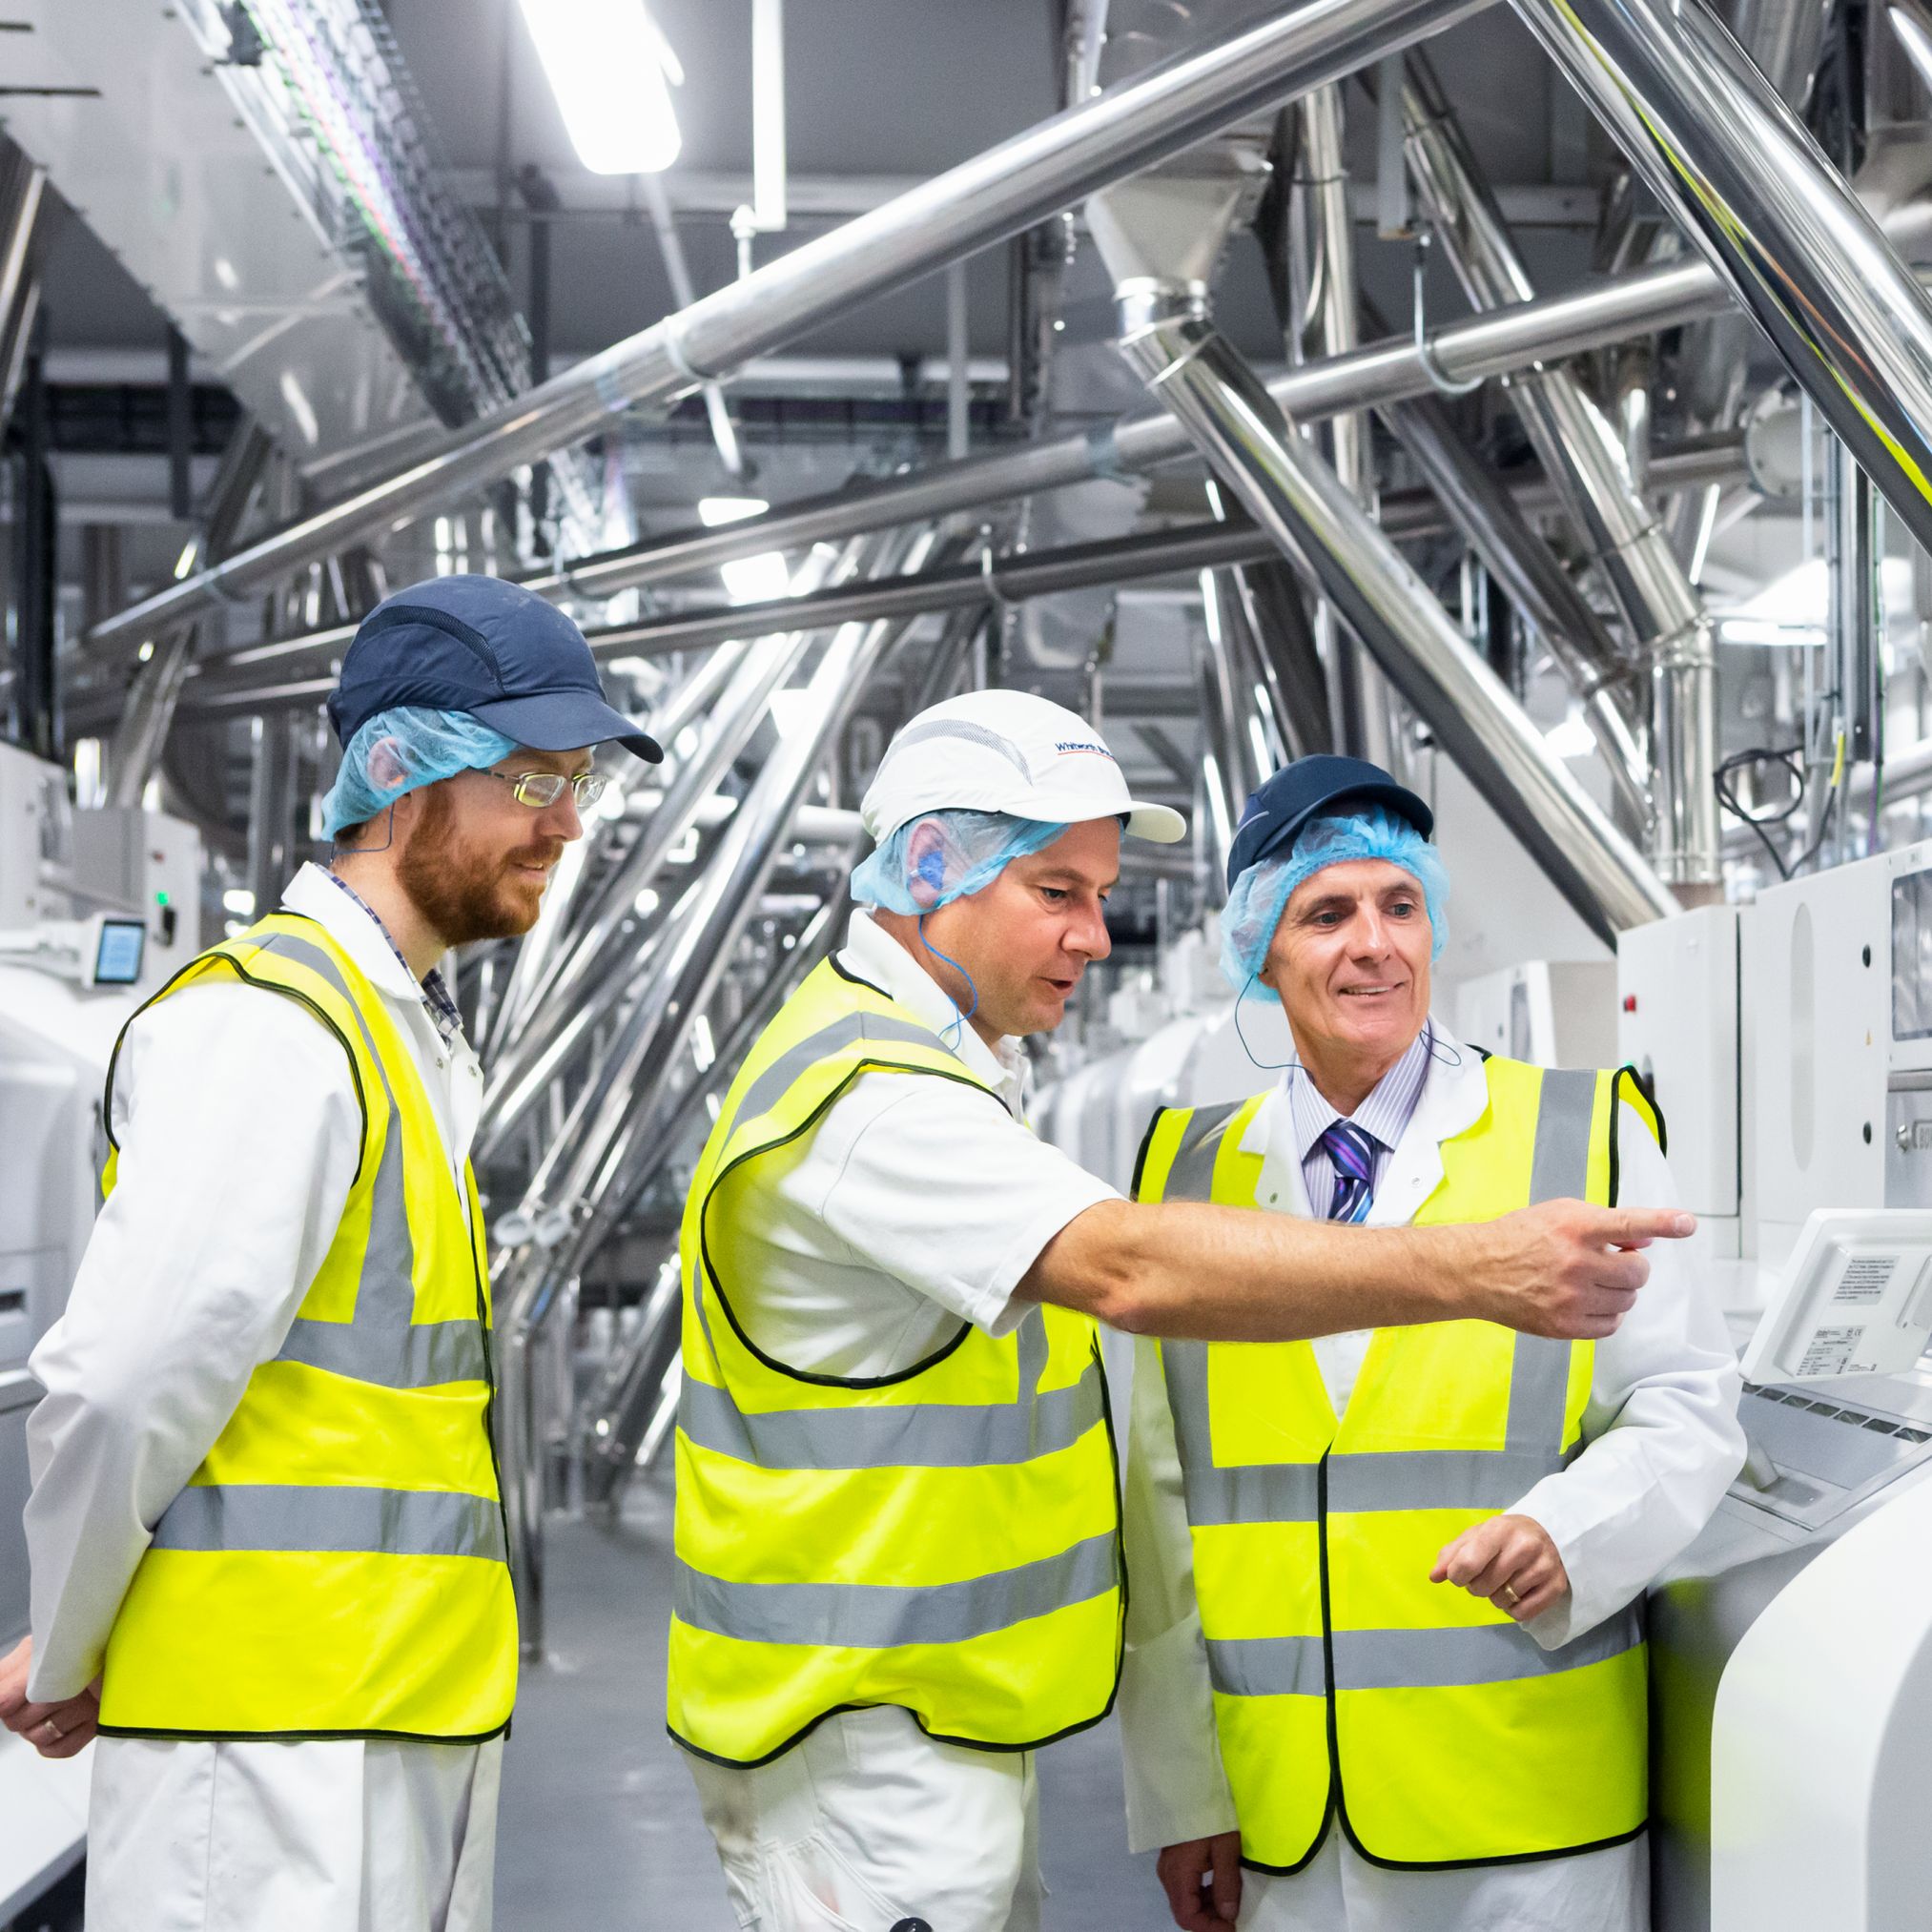 William Butler, Project Manager, Andrew Thomson and Mike Peters of Whitworth Bros. Ltd. review the processing data on the Arrius integrated grinding system.